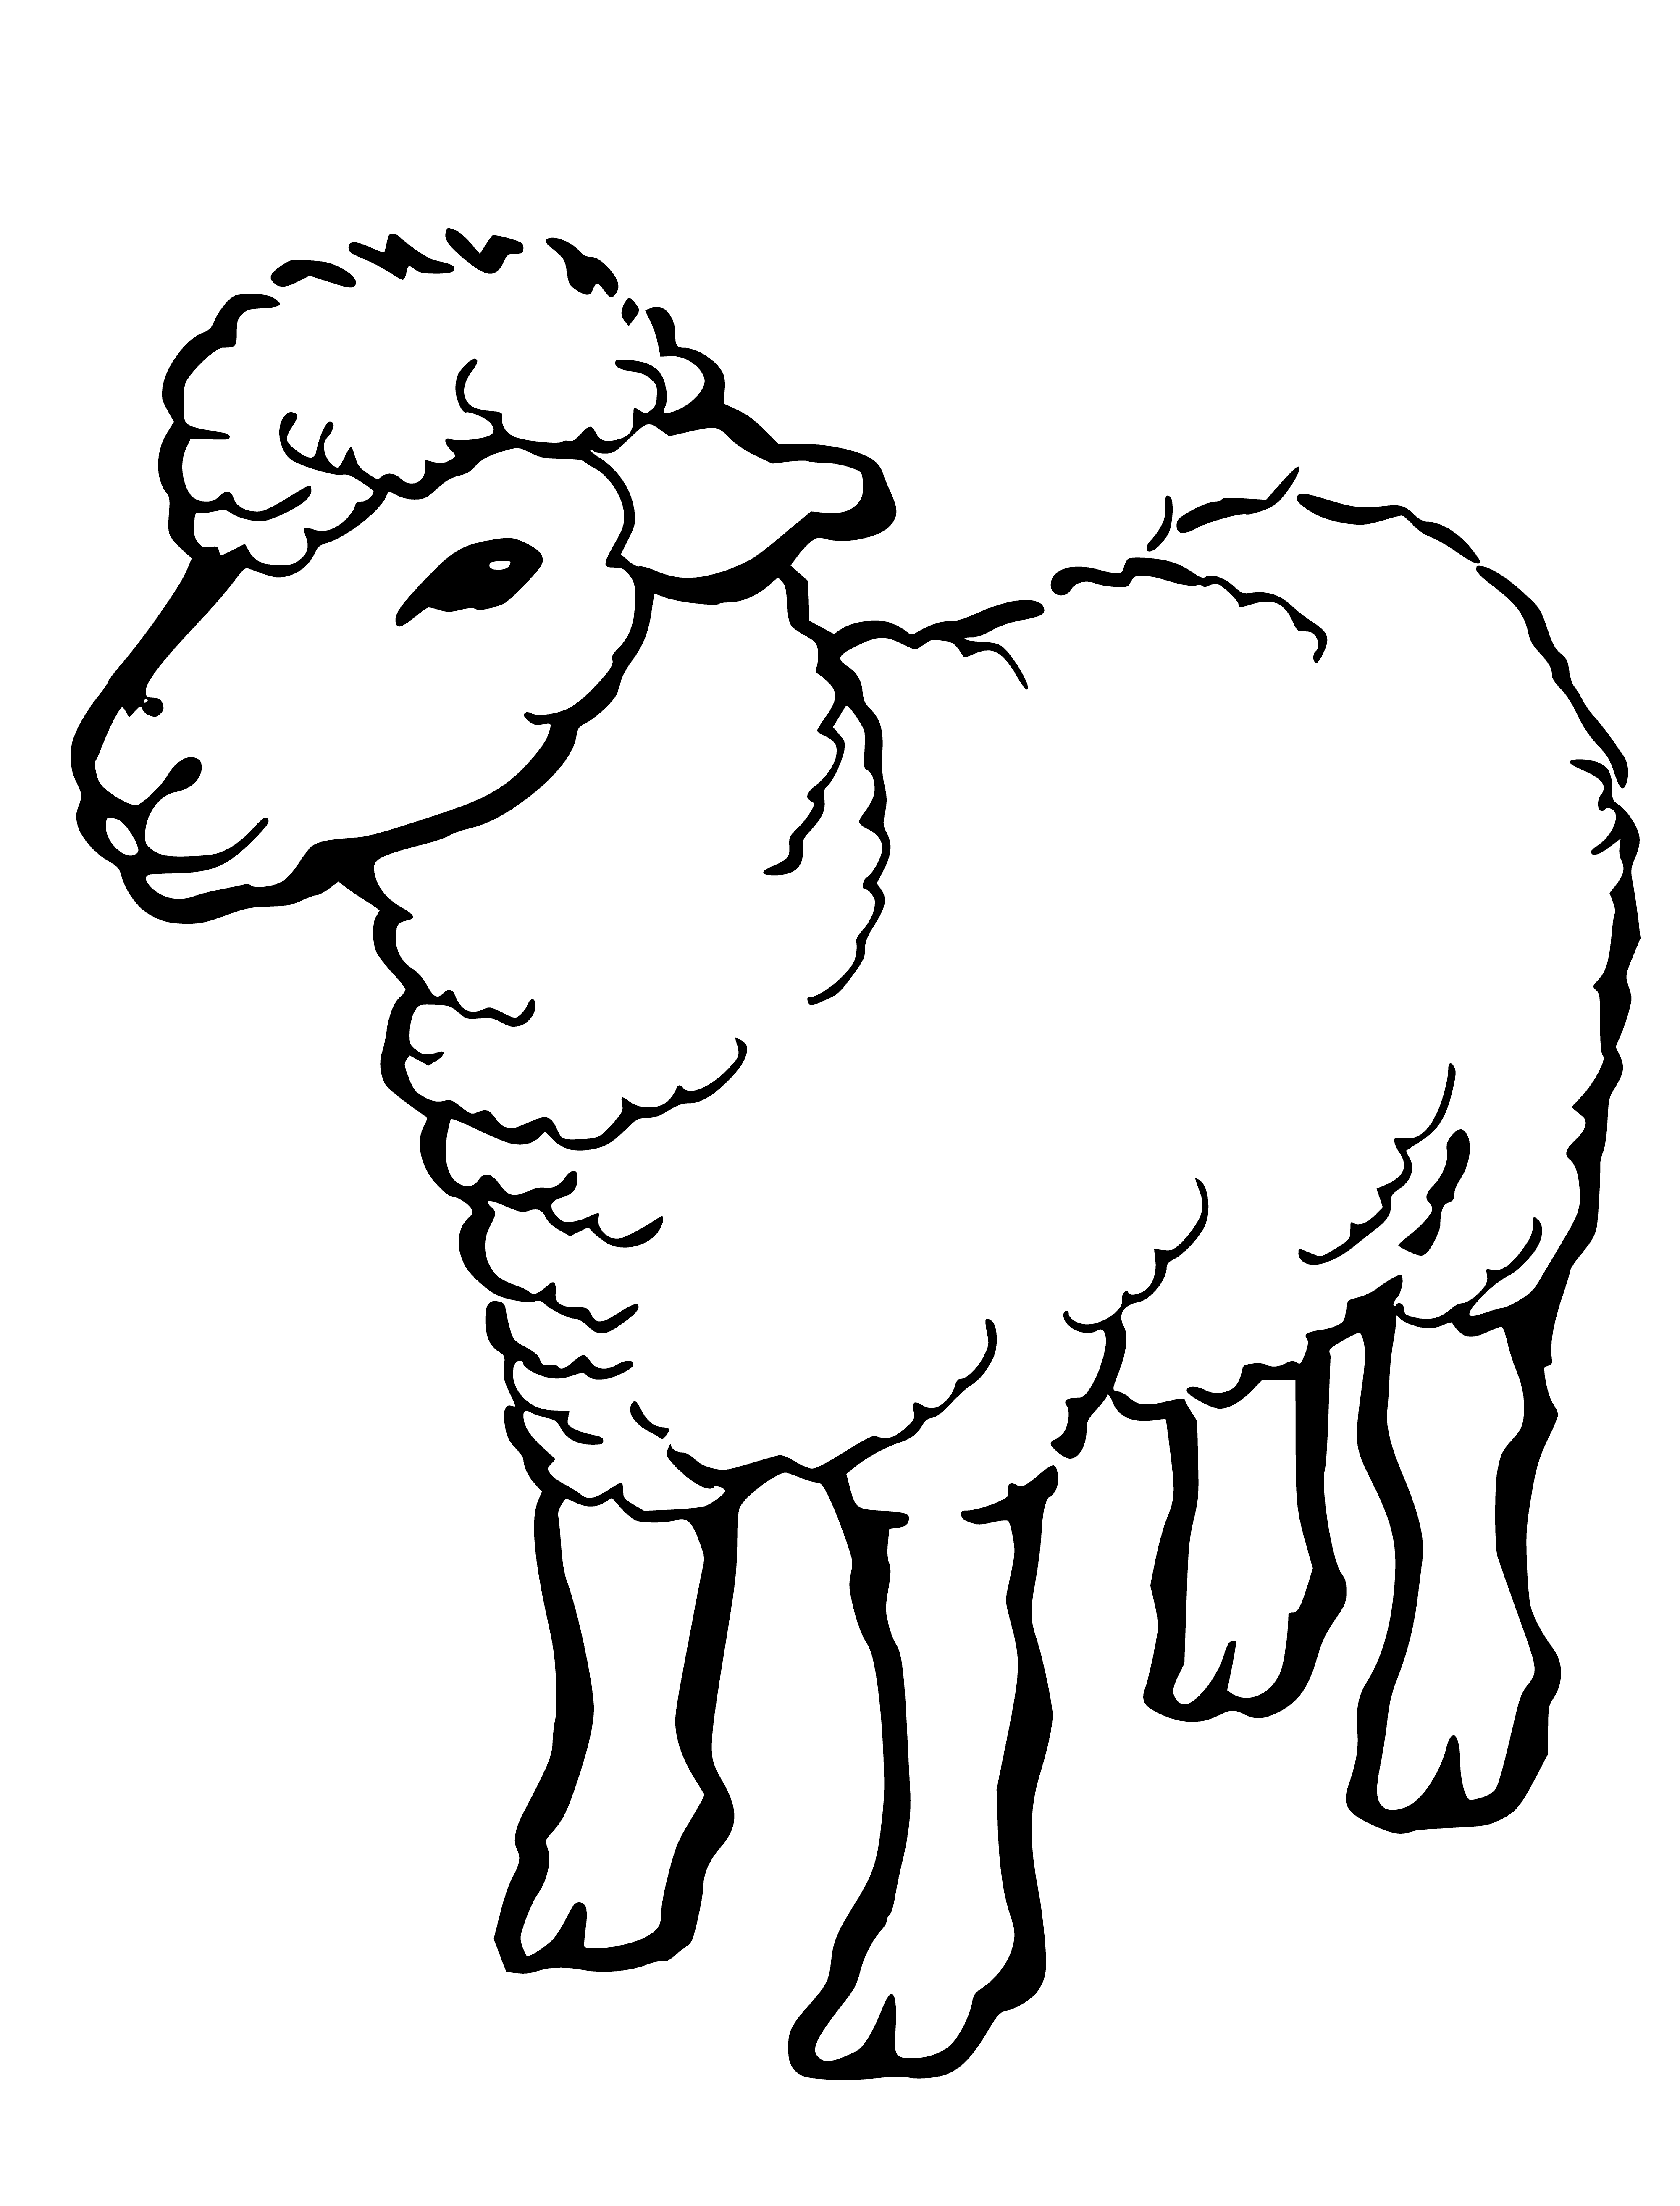 coloring page: Sheep with curly wool, big eyes, and black nose stands in a green field, head tilted to side.